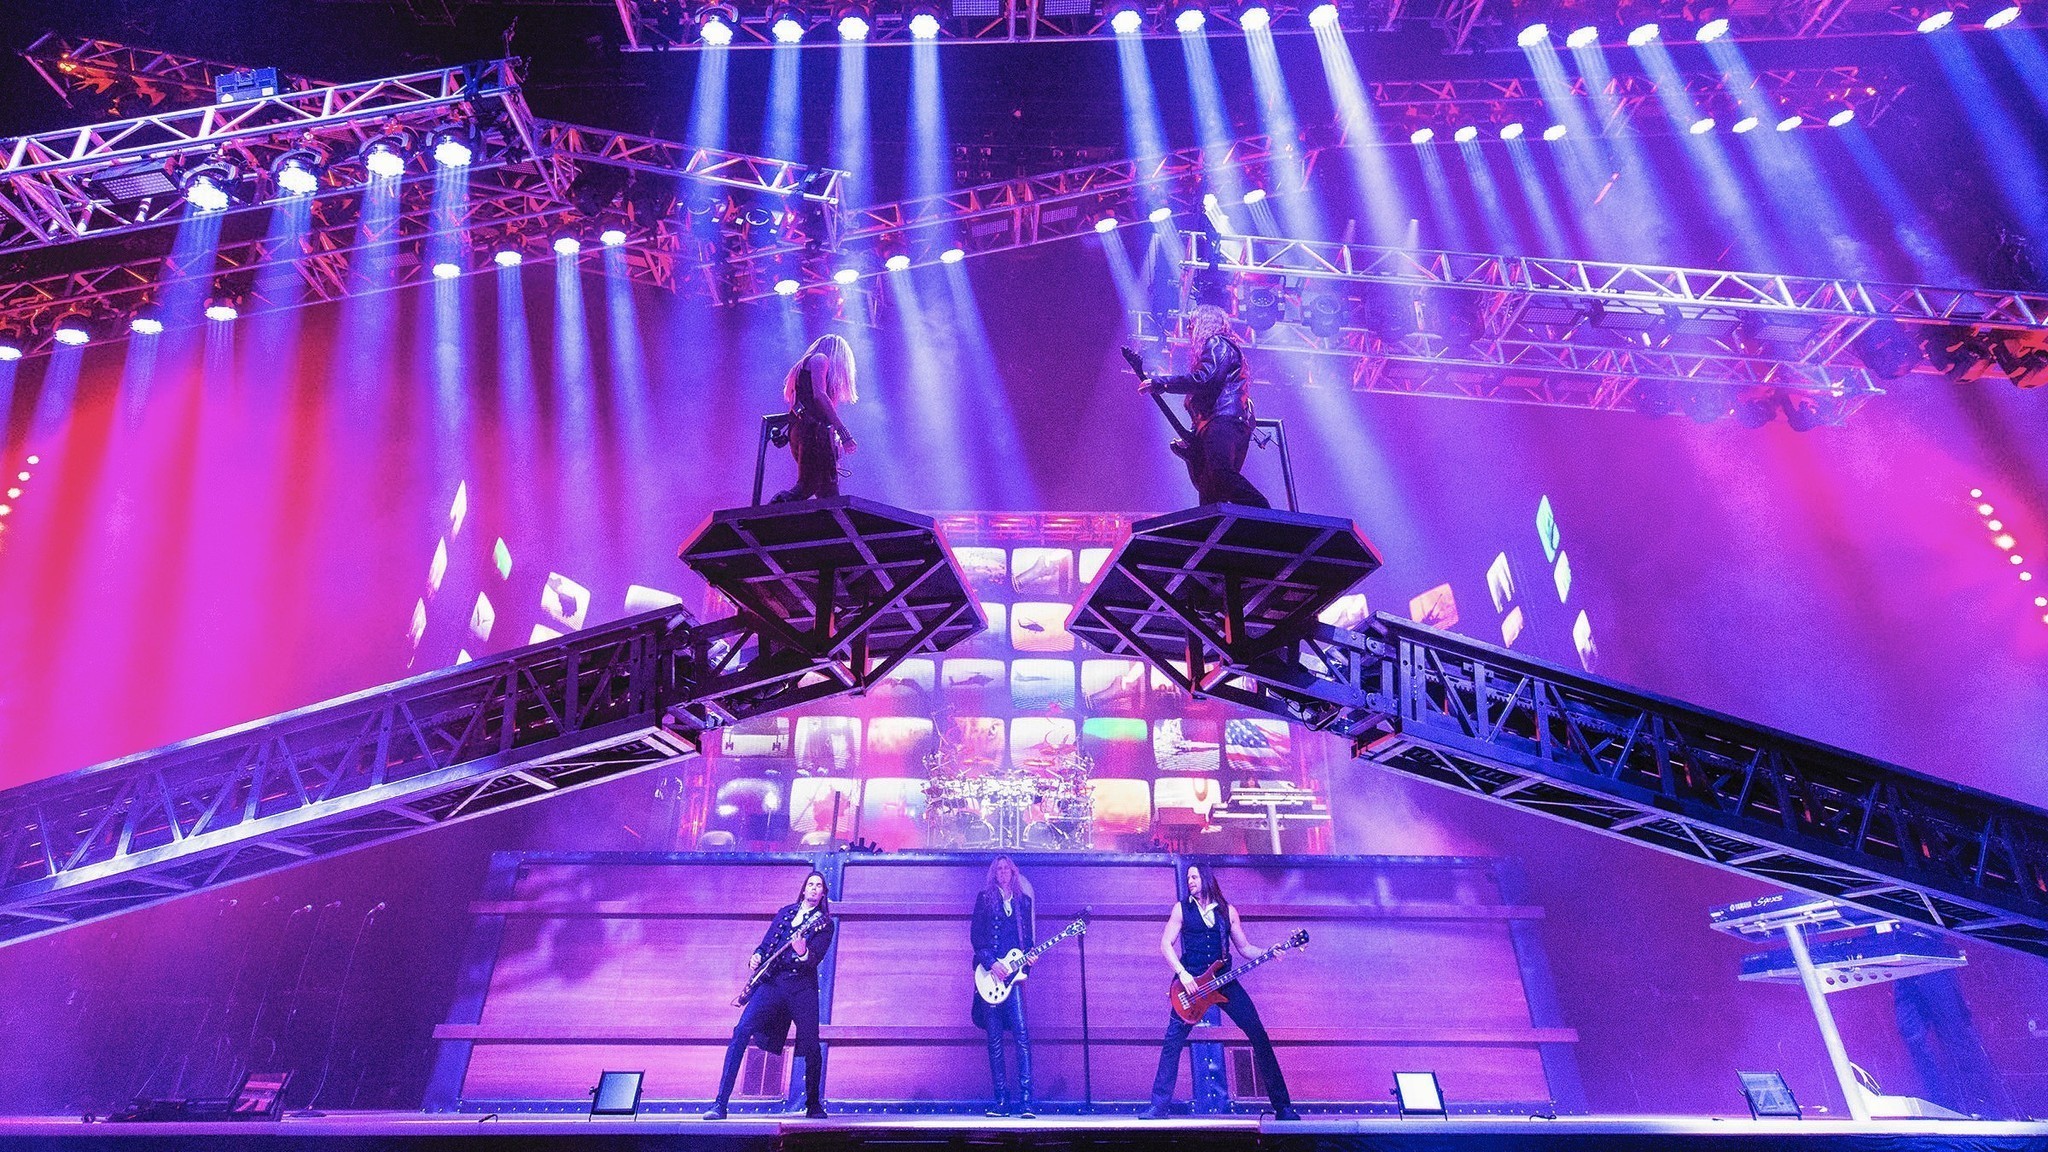 Trans-Siberian Orchestra plays its 'Christmas Attic' on new tour - The Morning Call